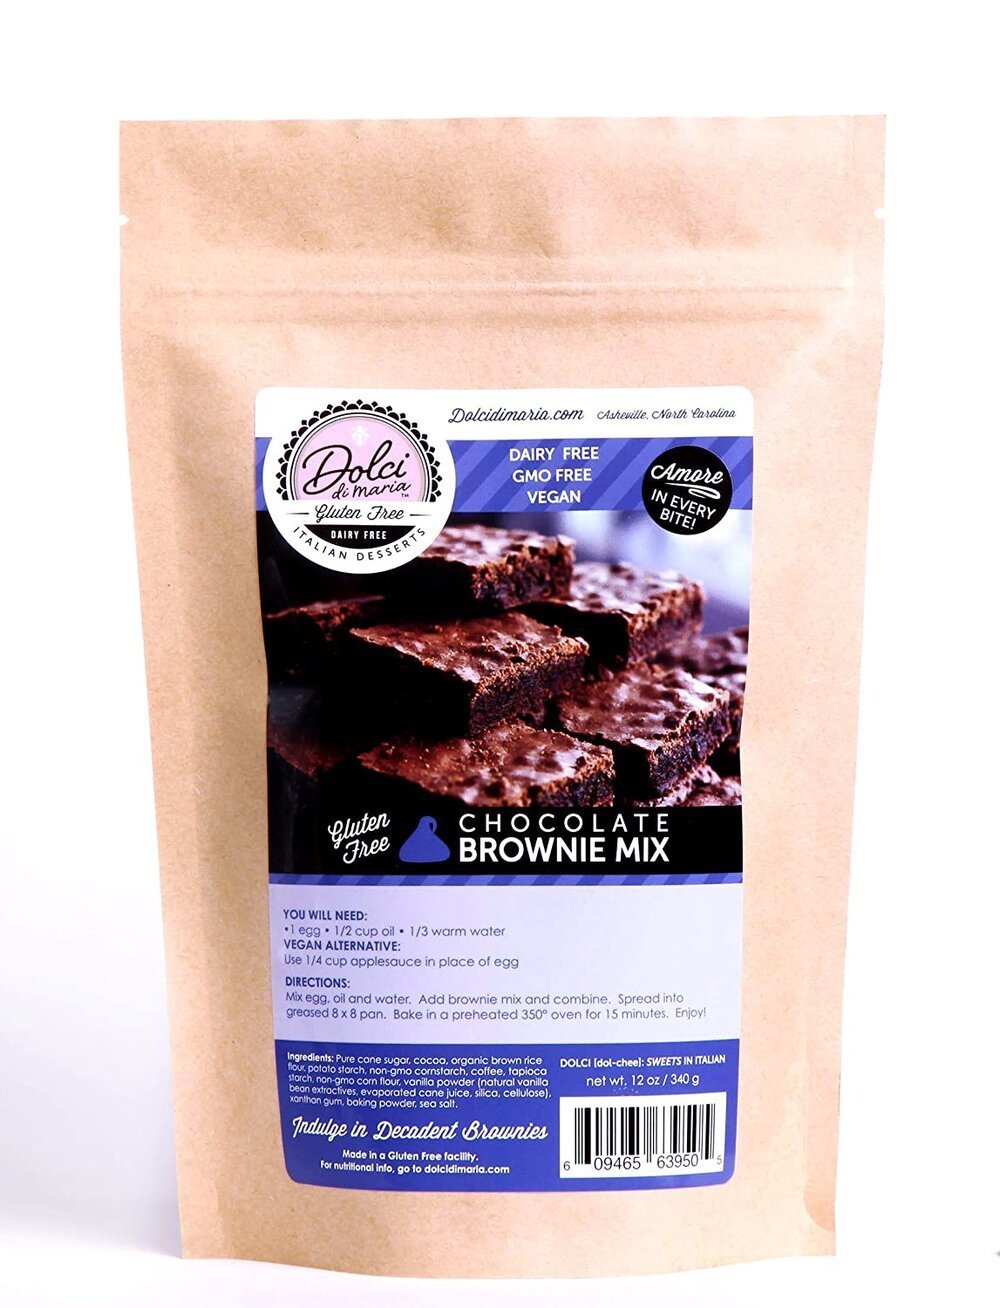 Local Gluten Free Chocolate Brownie Mix by Dolci di Maria